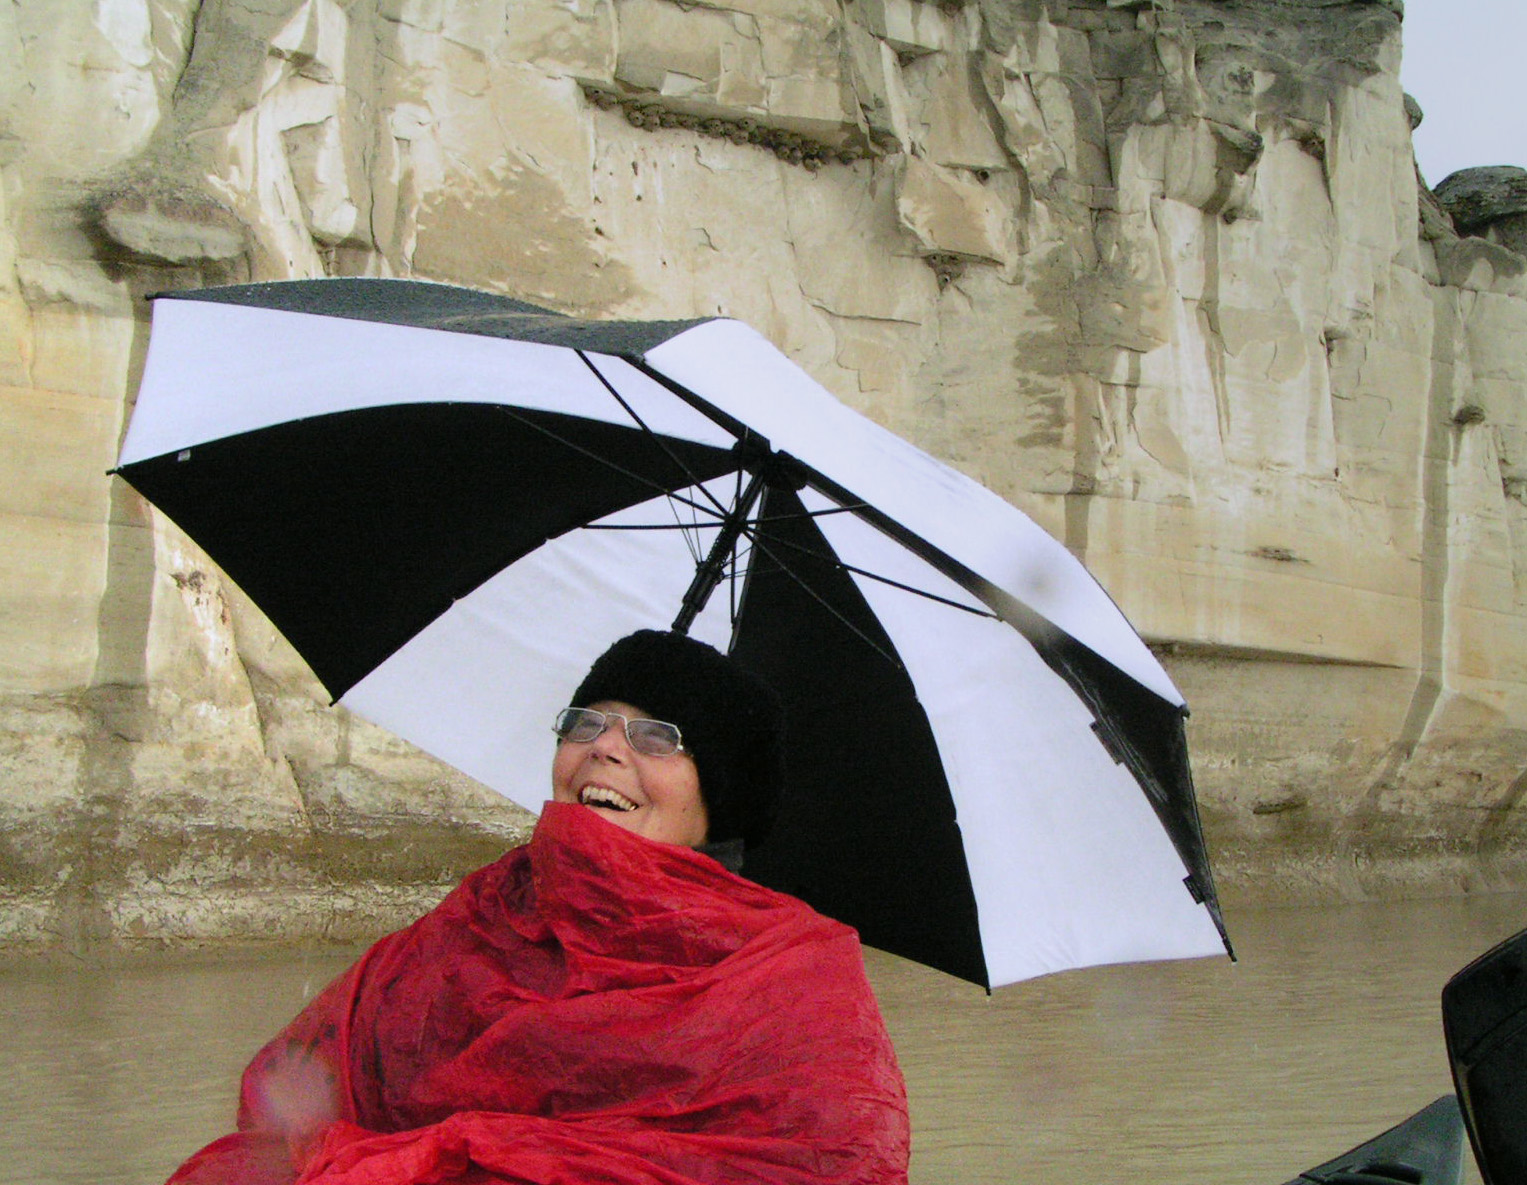 Bonnie Blackmore visits the White Cliffs along the Missouri River in Montana. She lived for 26 years as a quadriplegic.